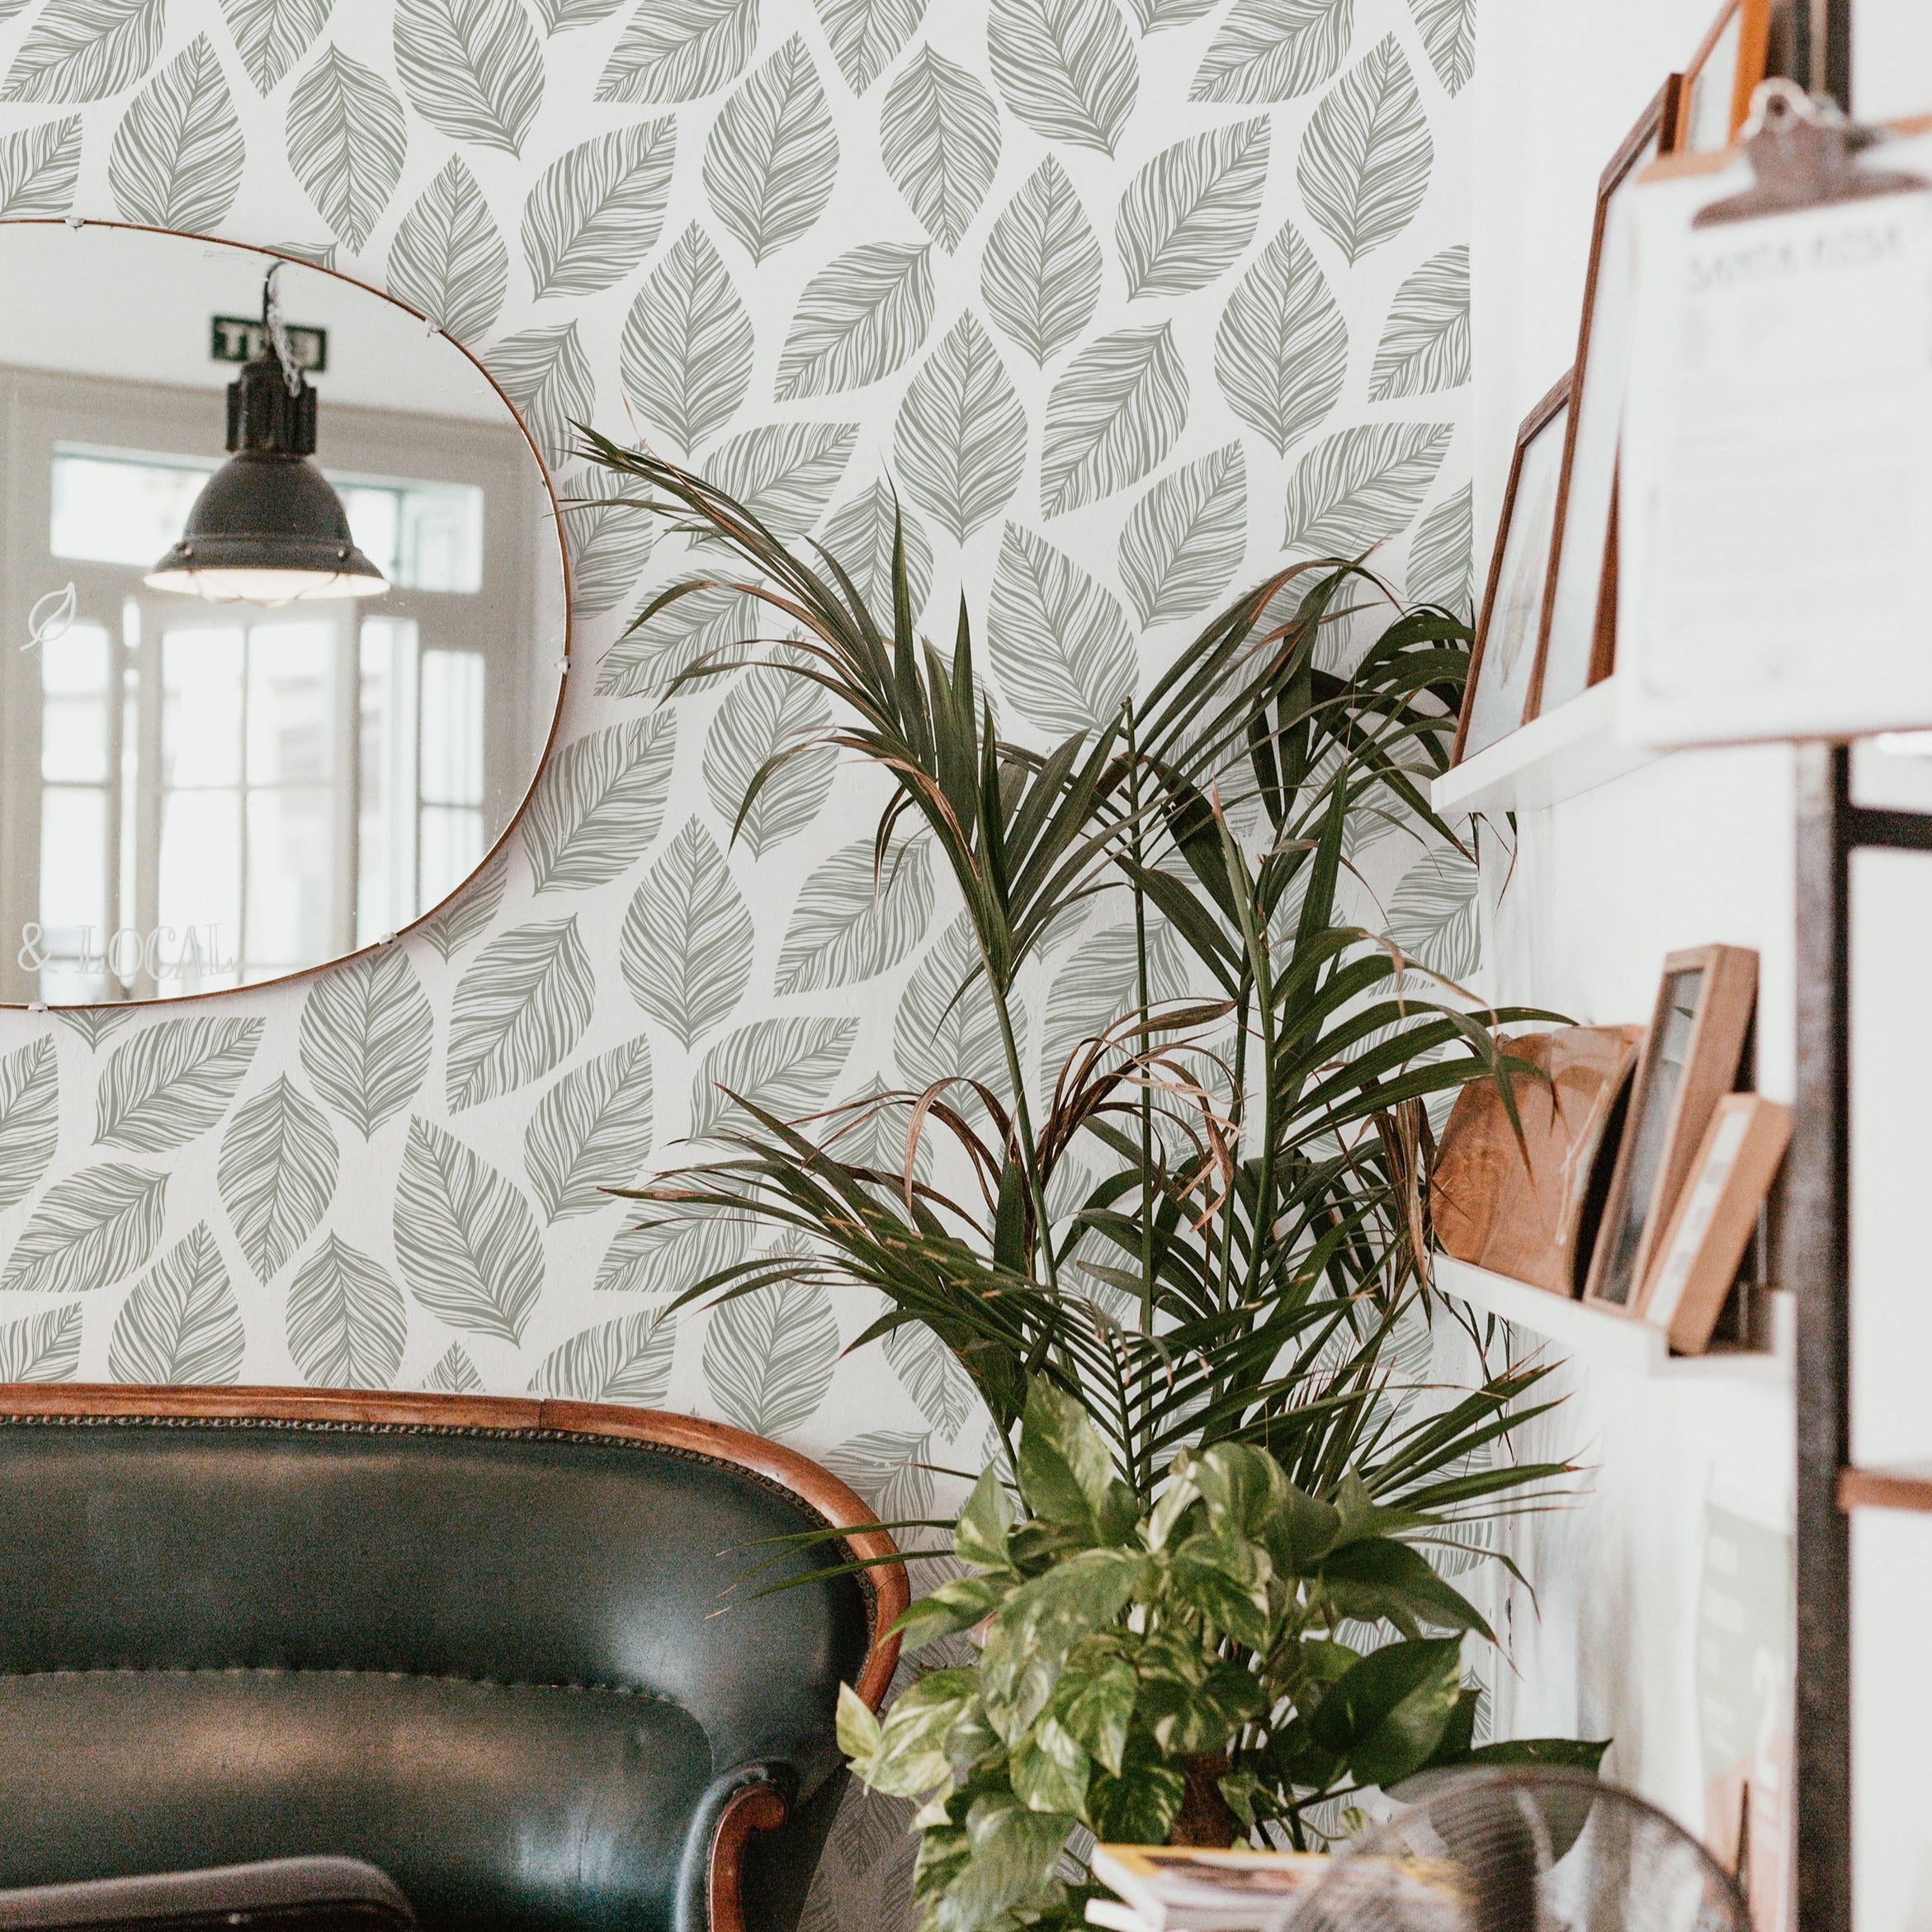  cozy corner of a cafe decorated with Leafy Wallpaper that showcases a clean and serene arrangement of leaf designs in grey on white. The natural theme is complemented by a vintage leather sofa and a vibrant potted plant, creating a welcoming atmosphere.